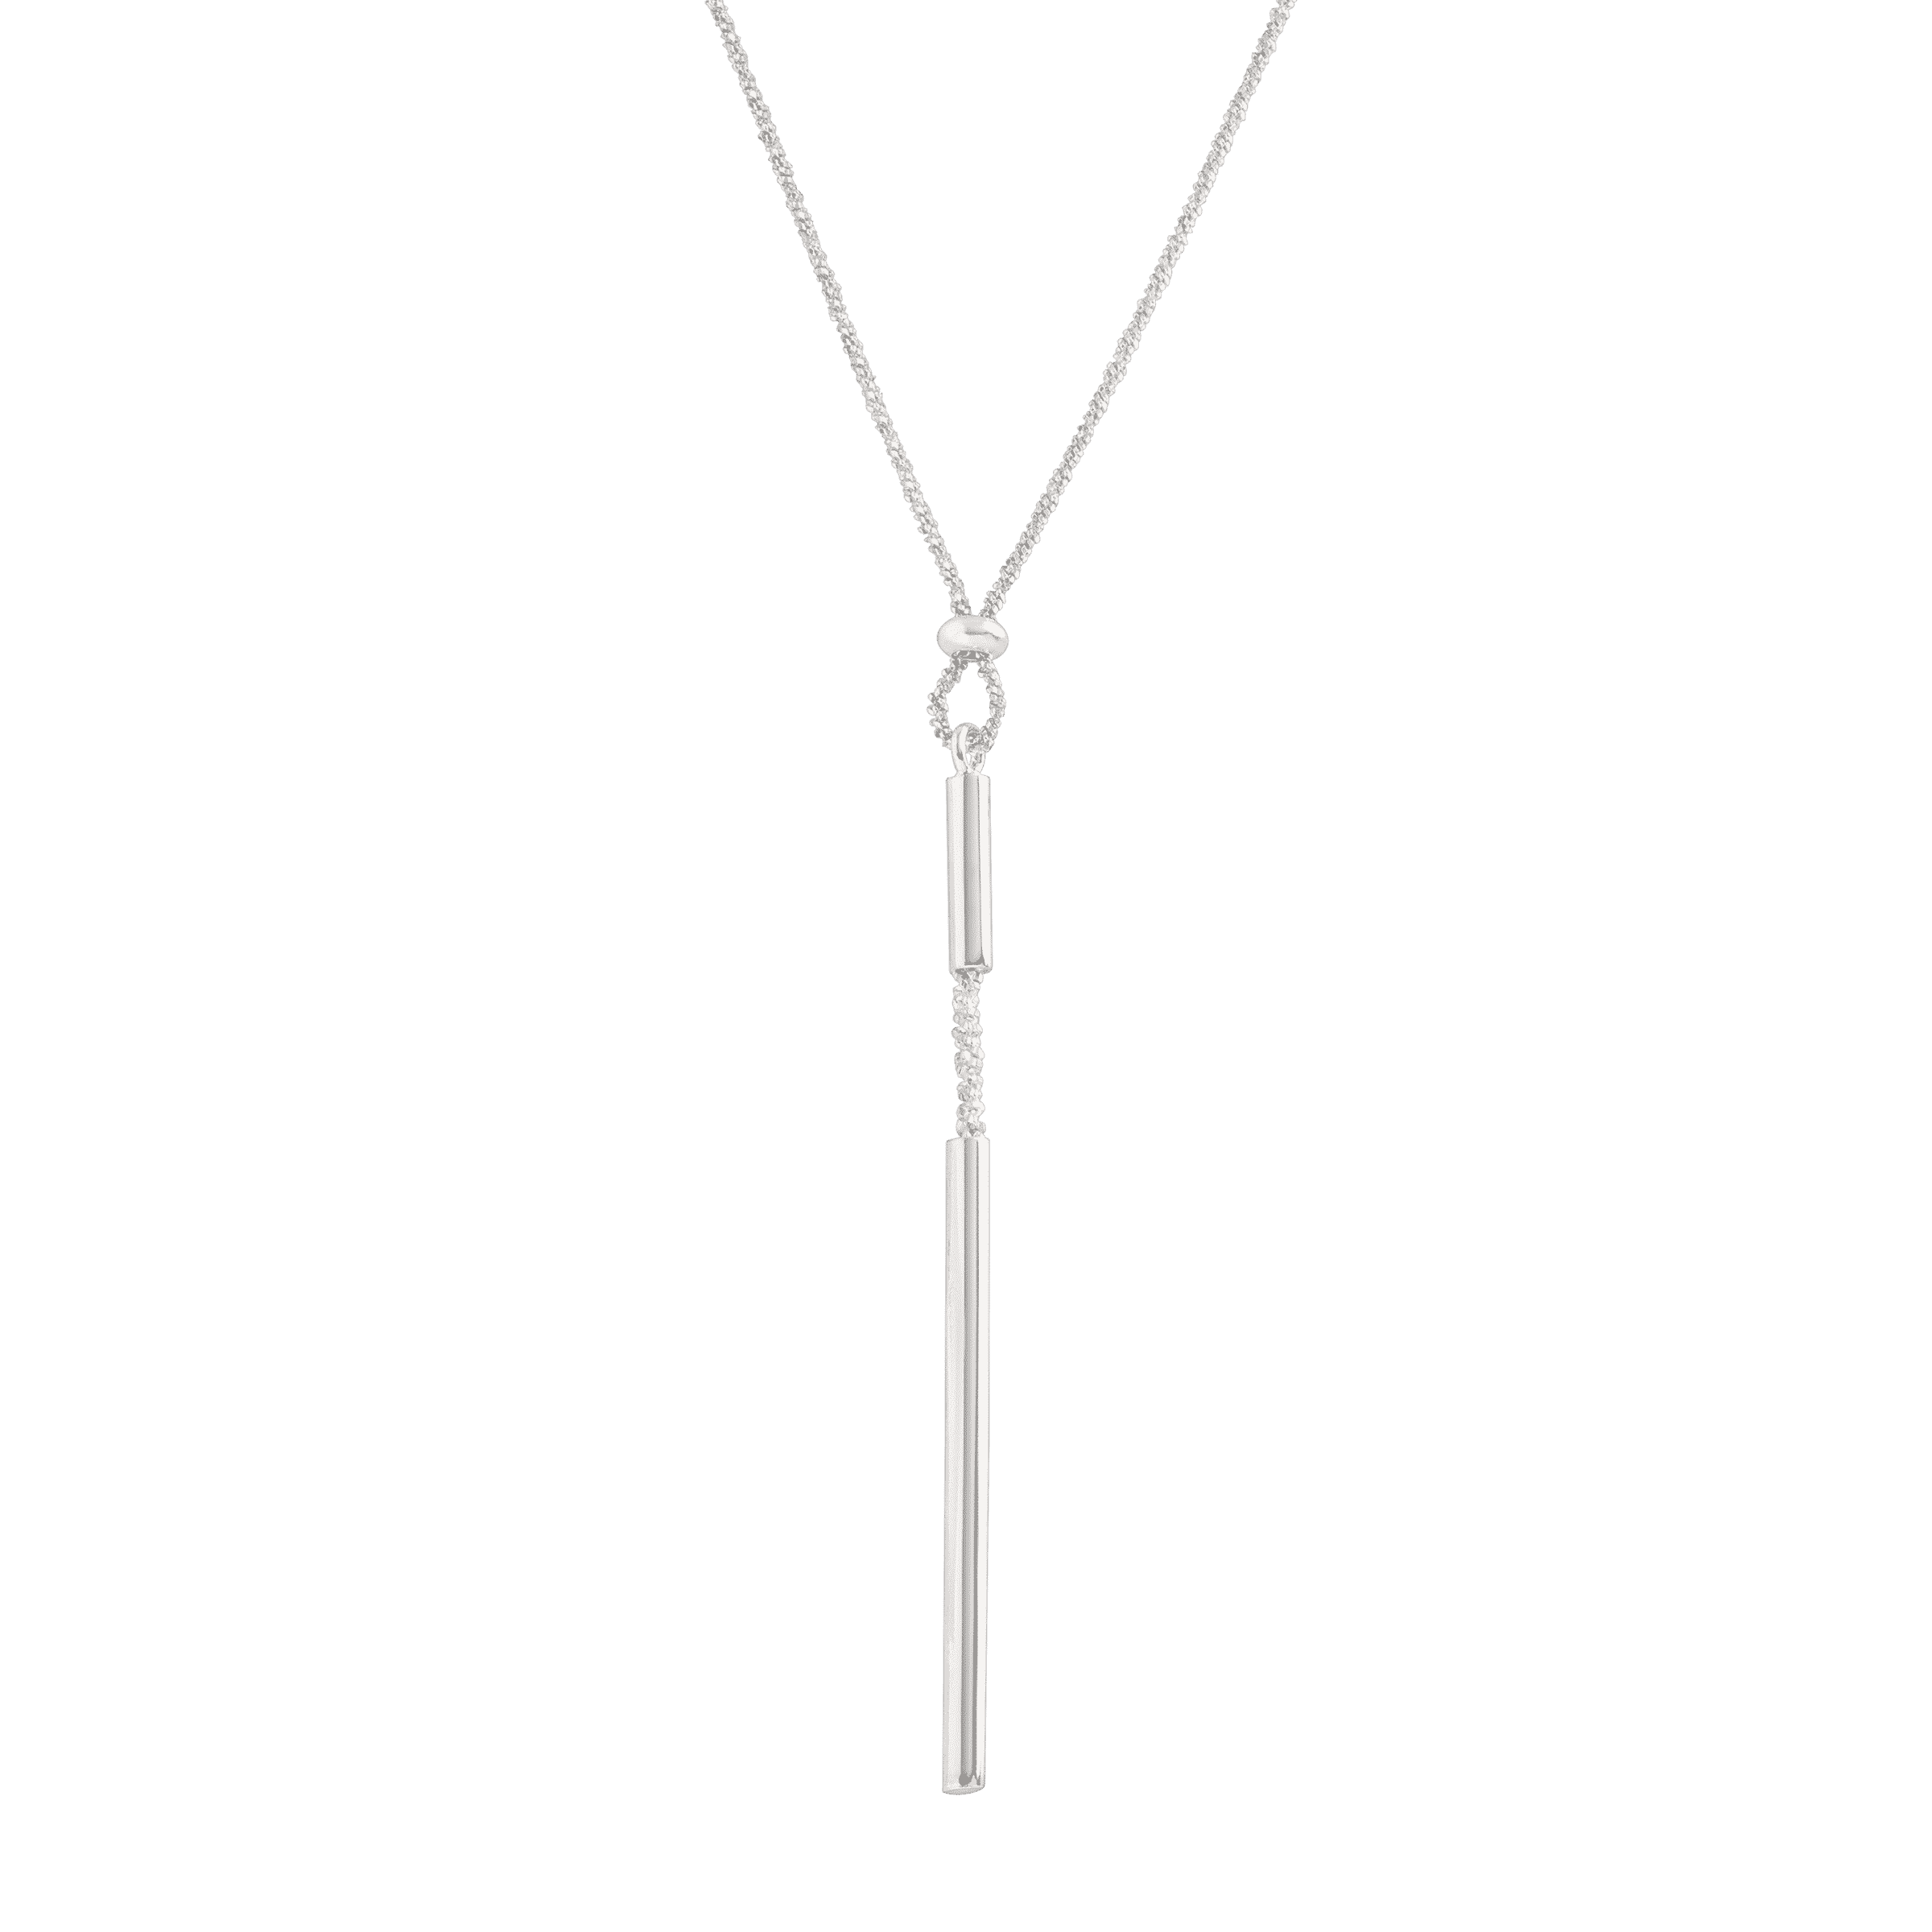 Silpada 'Water's Edge' Lariat Necklace in Sterling Silver, 16